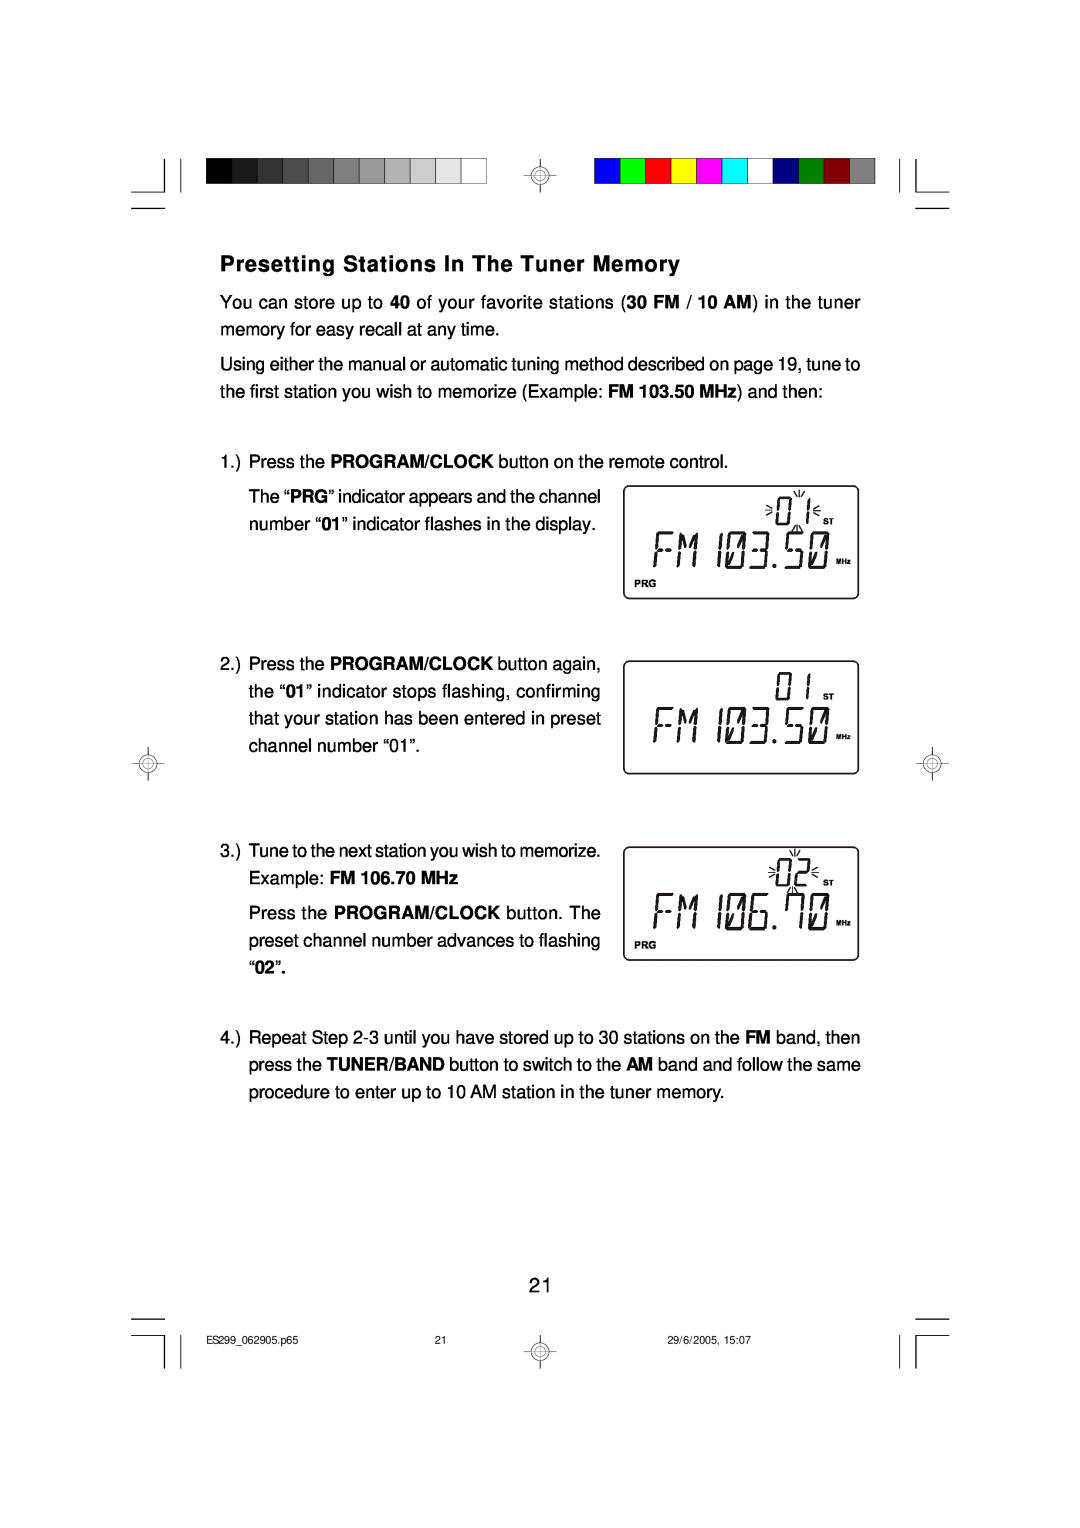 Emerson owner manual Presetting Stations In The Tuner Memory, ES299 062905.p65, 29/6/2005 